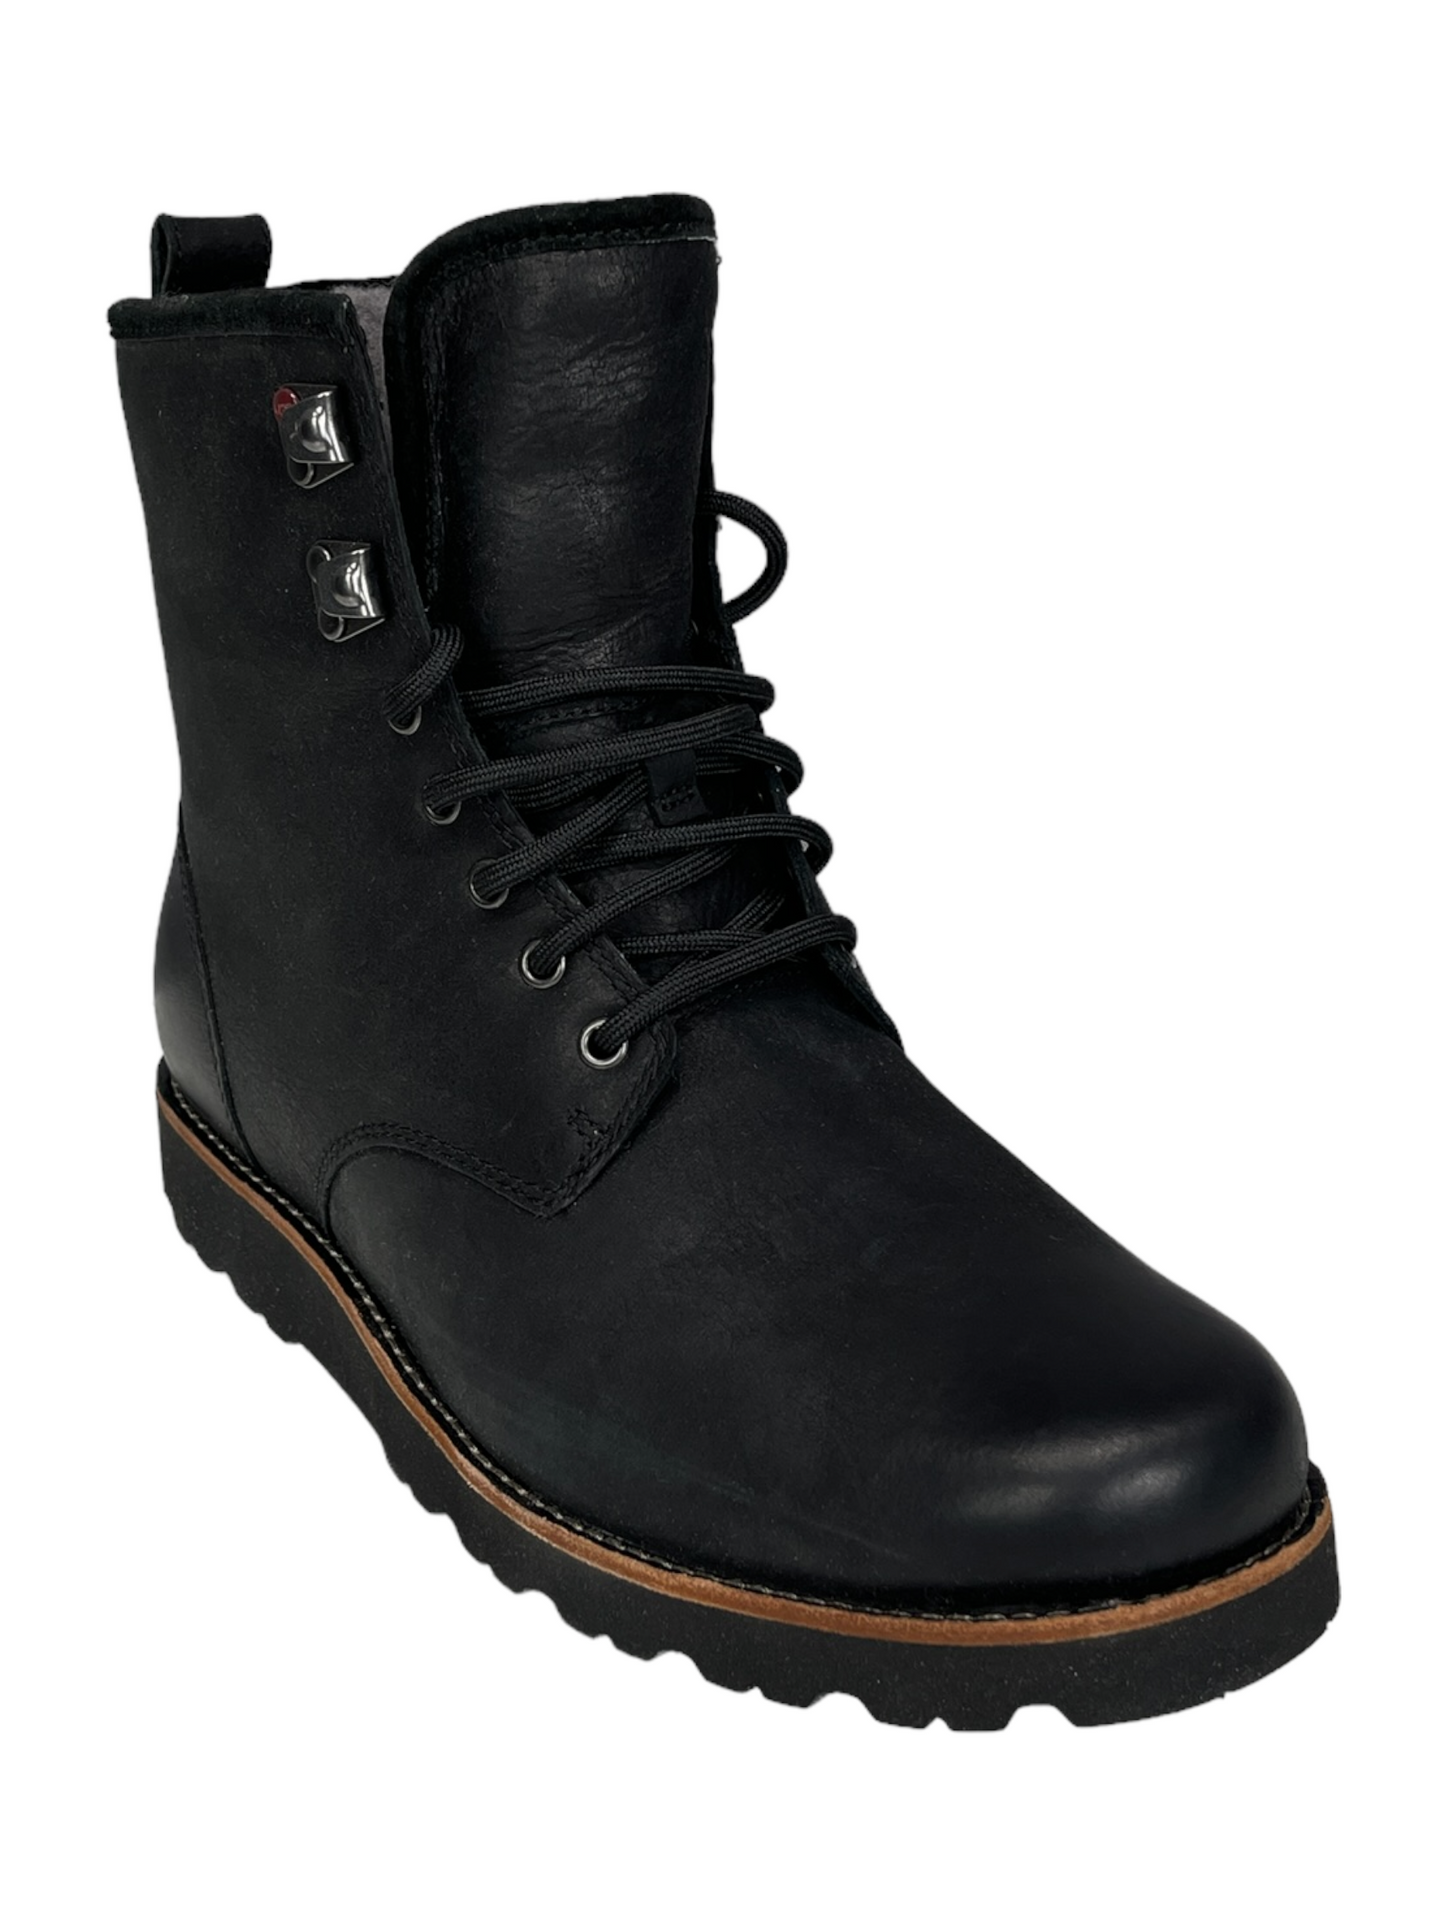 UGG Black Leather Winter Boot 8 US- Genuine Design Luxury Consignment Calgary, Alberta, Canada New and Pre-Owned Clothing, Shoes, Accessories.